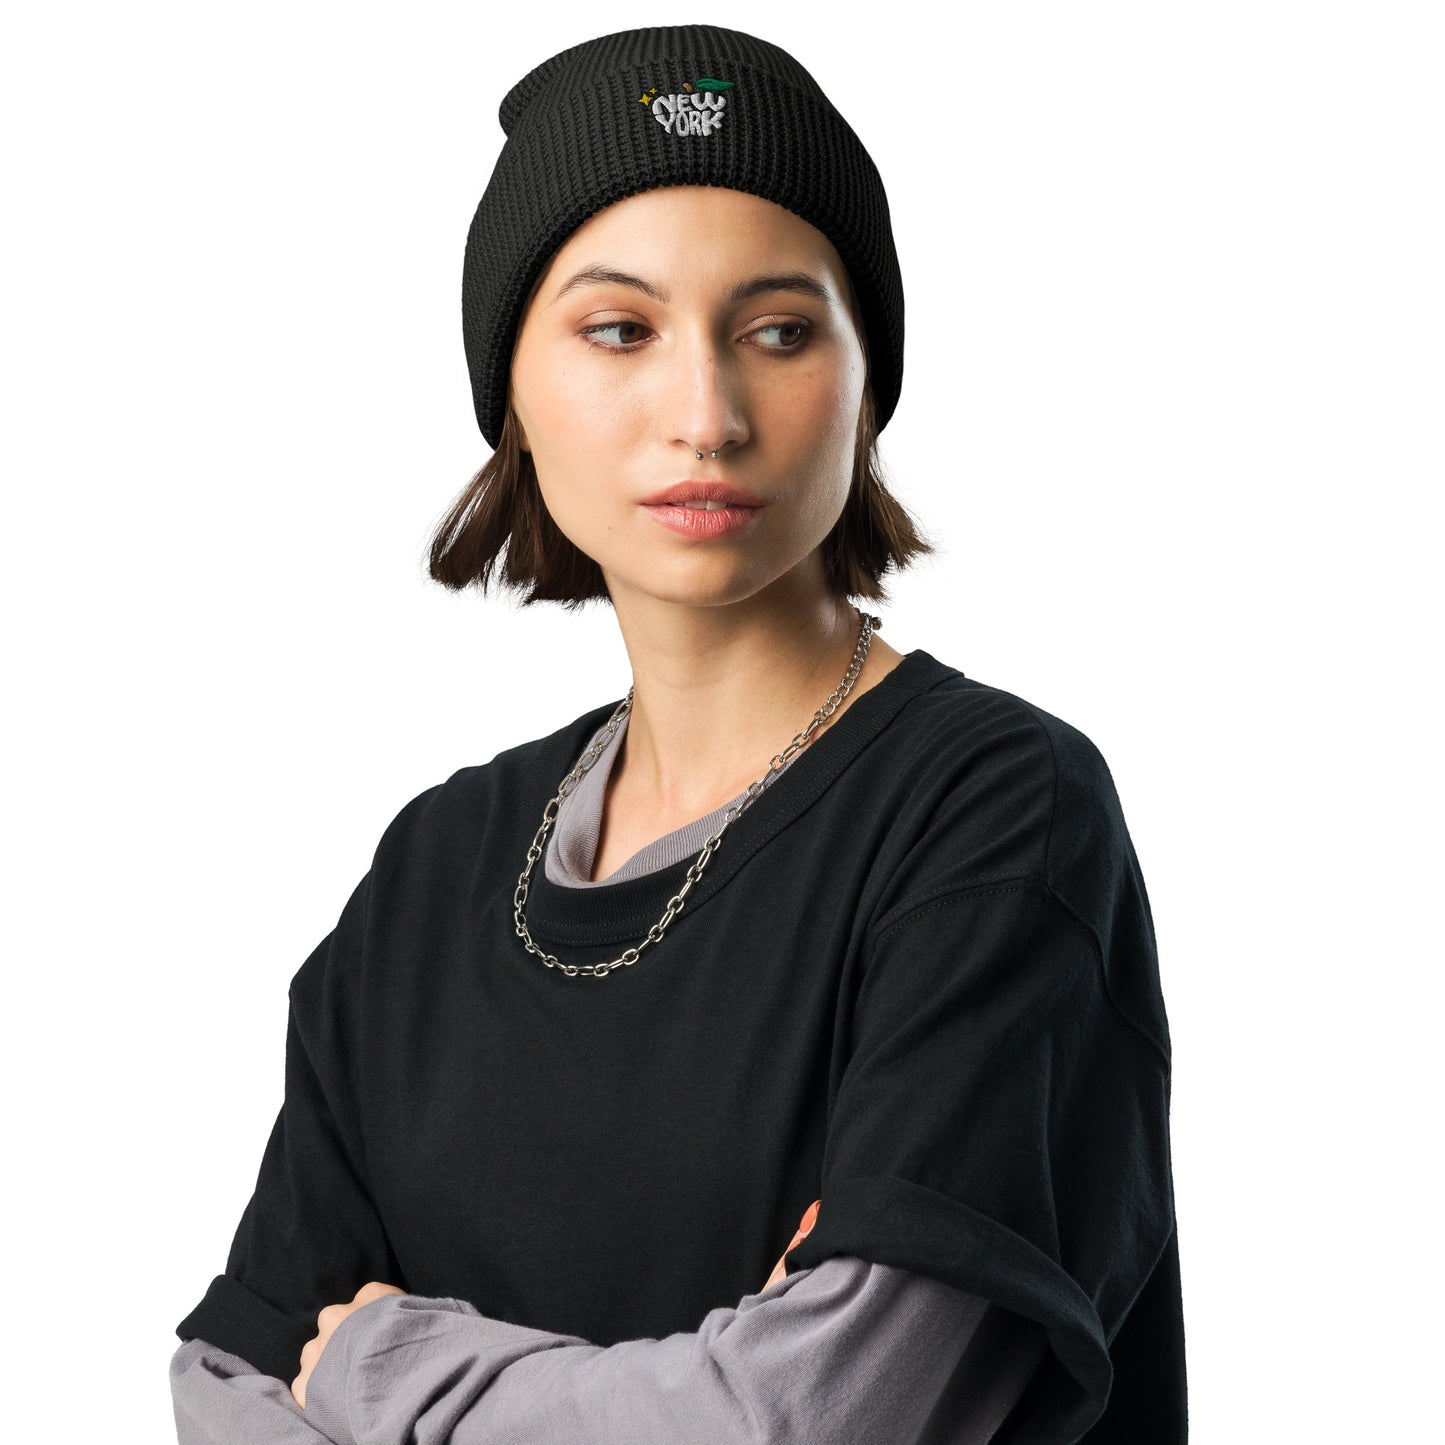 New York Apple Logo Embroidered Black Waffle Beanie Hat Scattered Streetwear